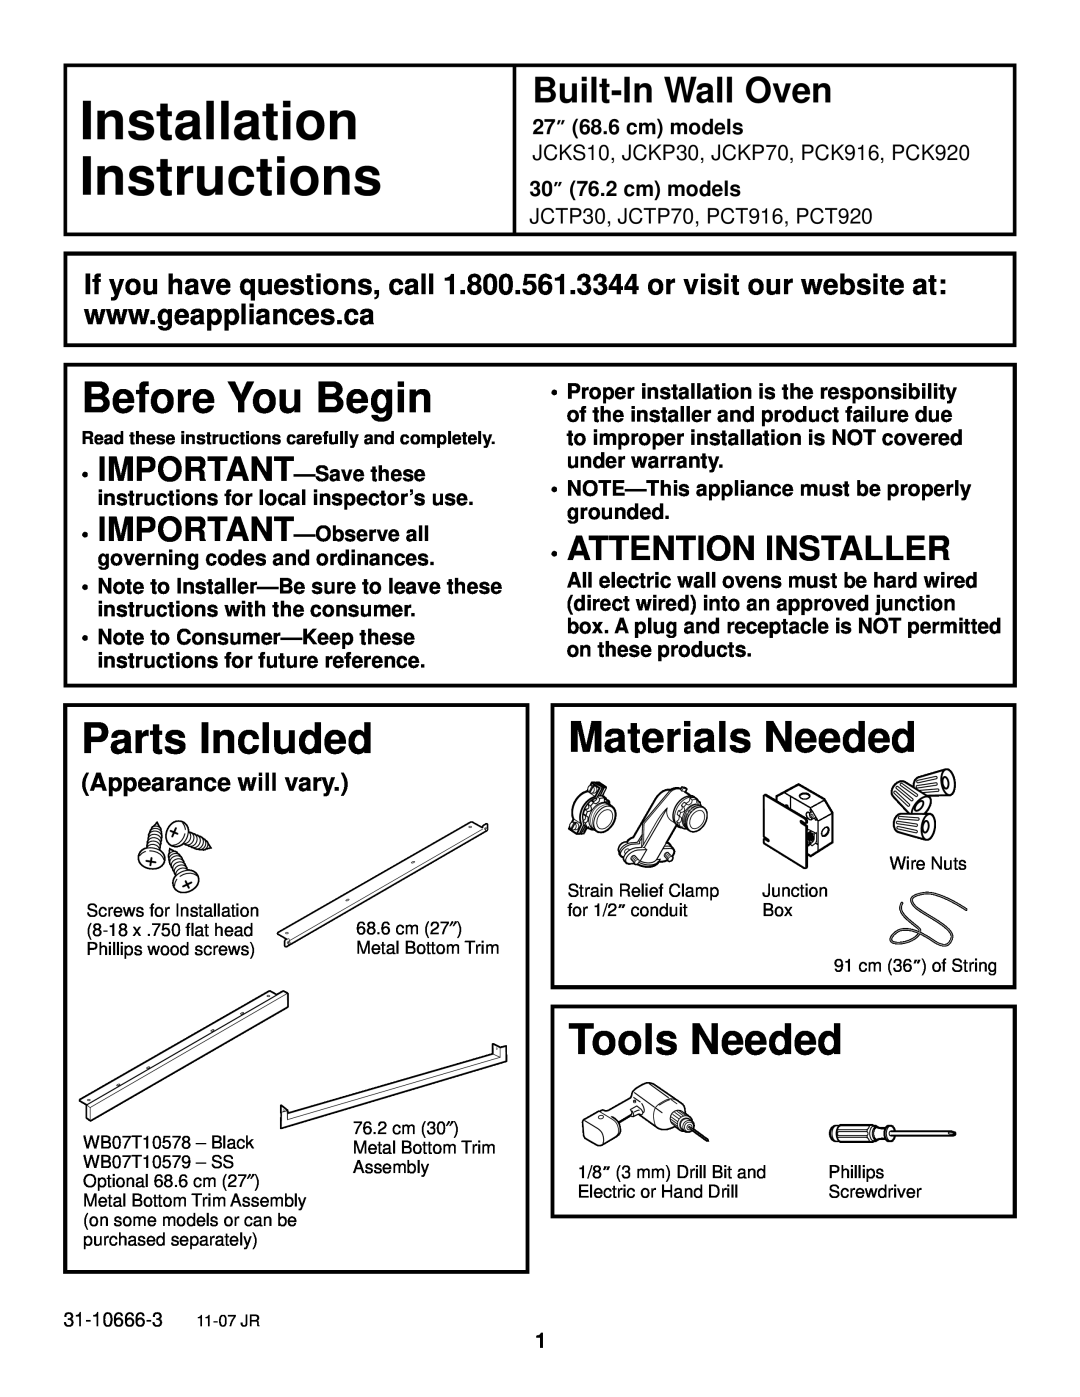 GE JCKS10, JCTP30 installation instructions Installation Instructions, Before You Begin, Parts Included, Materials Needed 